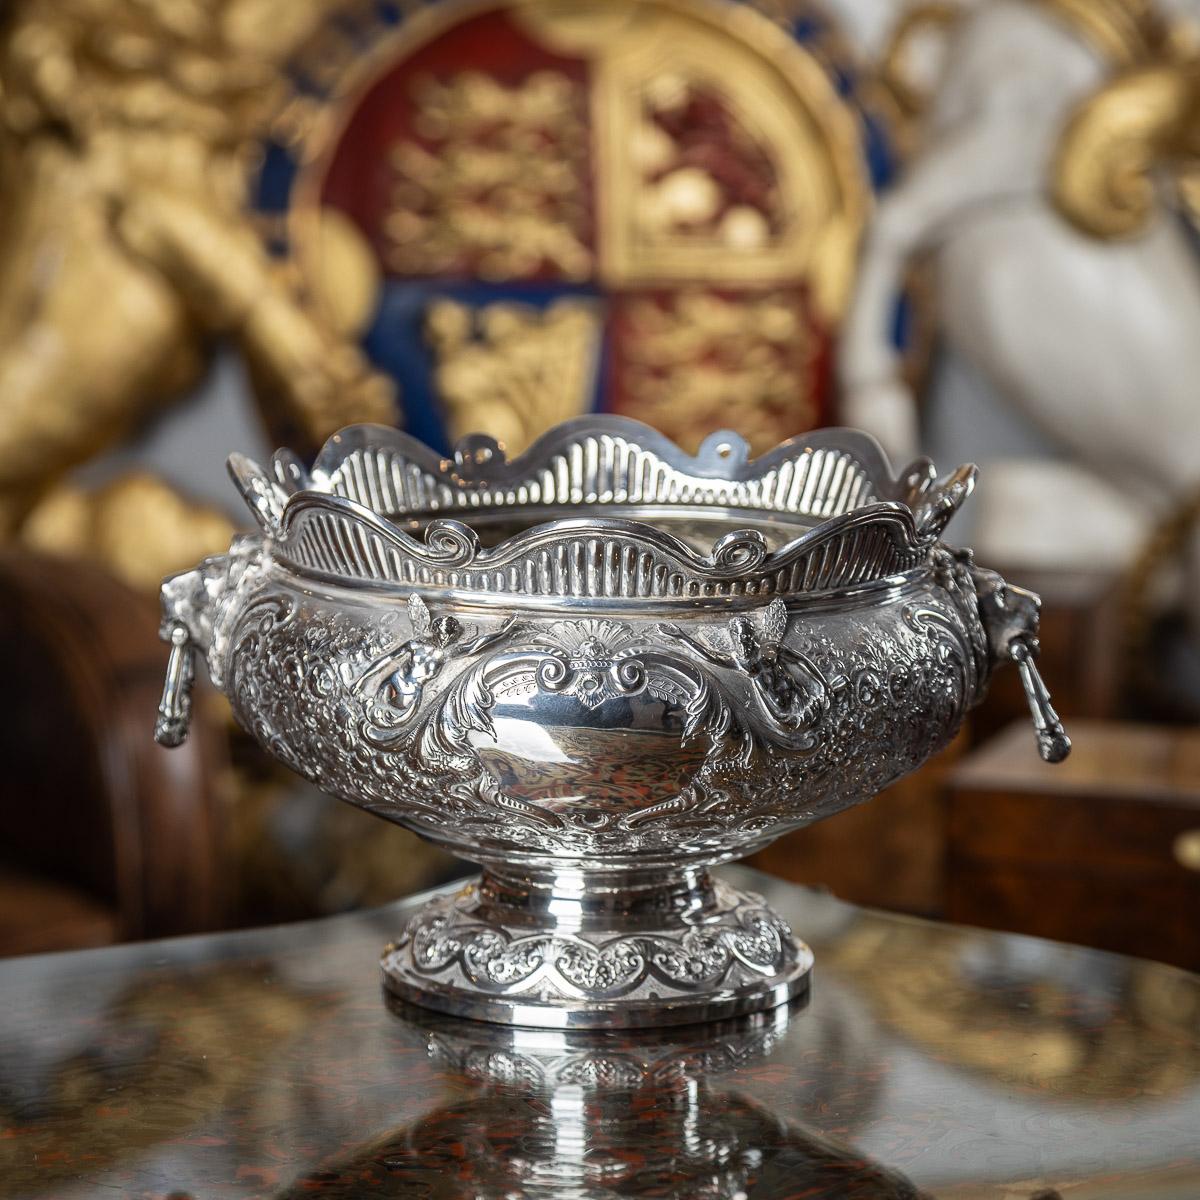 Antique late-19th Century Victorian solid silver armada bowl, the body is intricately adorned with elaborate chasing and embossing, showcasing a pristine floral decoration. On each side, finely crafted projecting angels flank an empty cartouche,